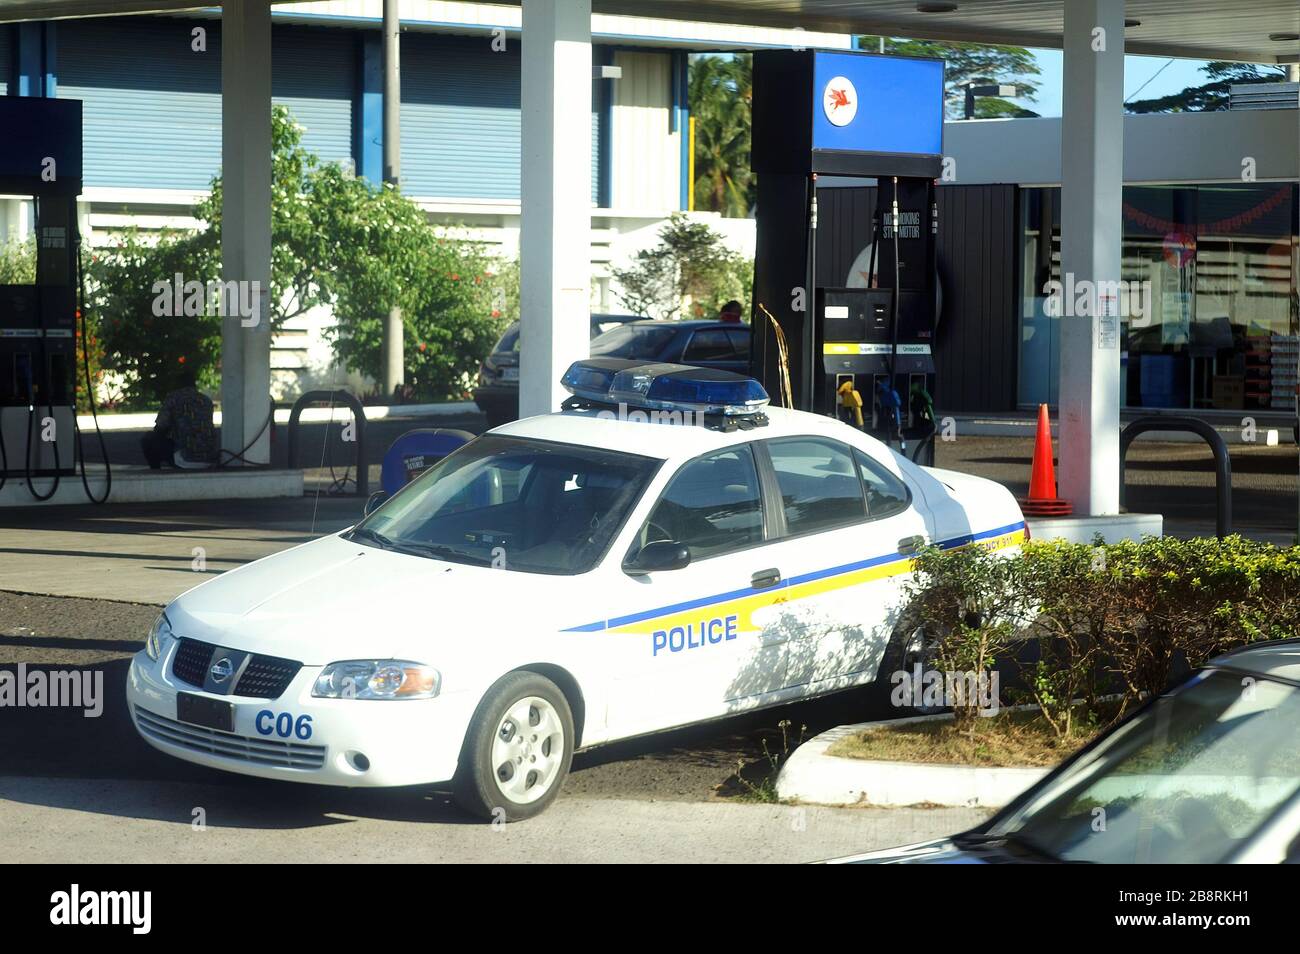 Palau, FEB 25, 2005 - Police car is leaving from a gas station Stock Photo